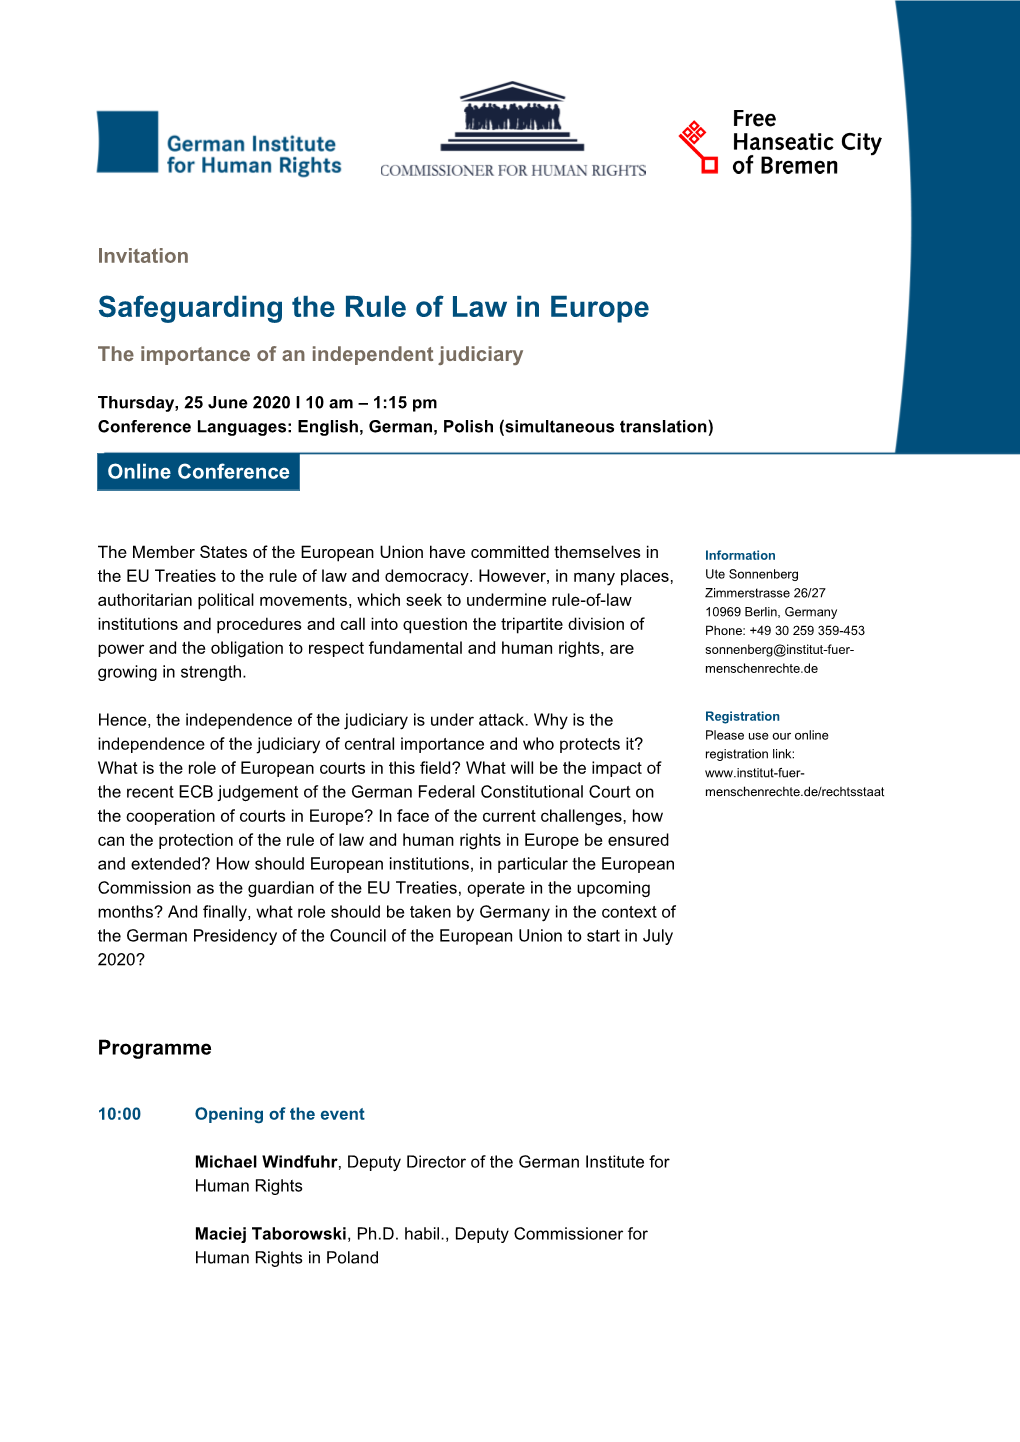 Safeguarding the Rule of Law in Europe